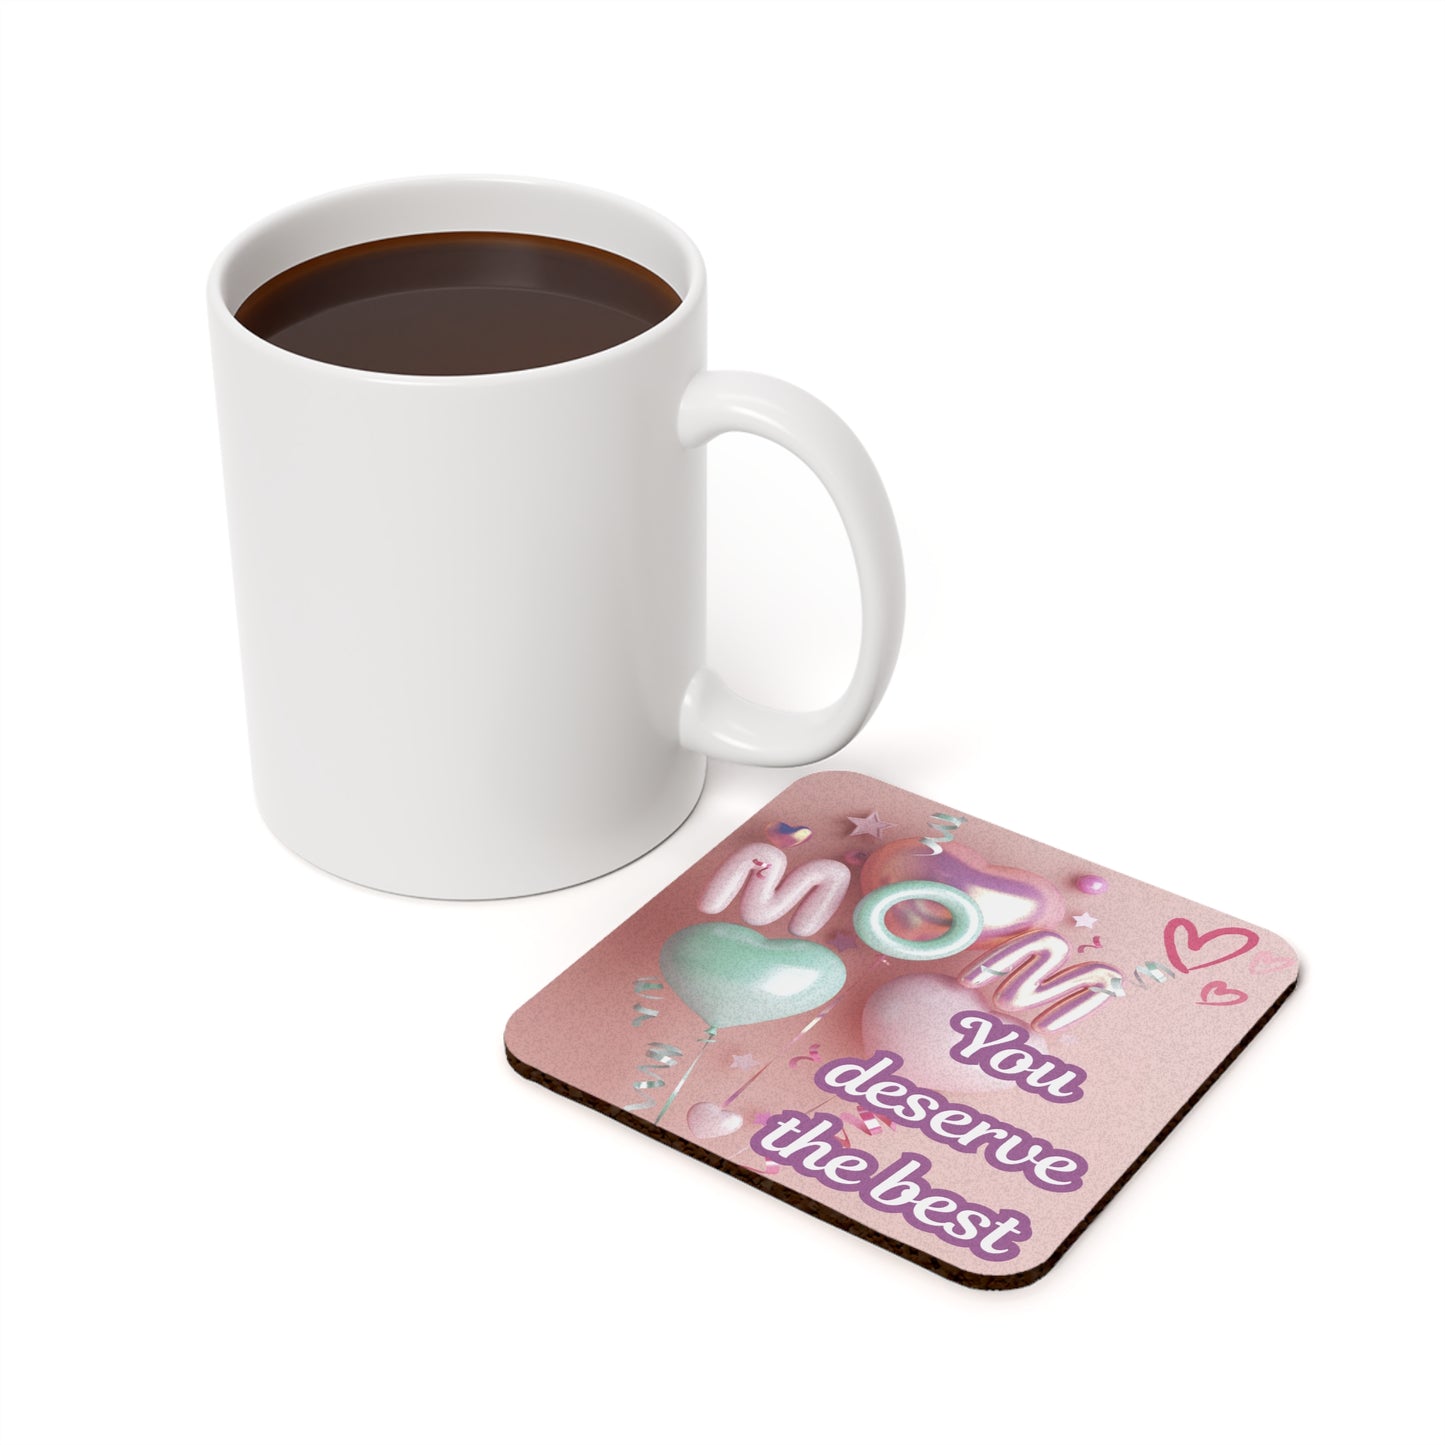 Non-slip premium cork coaster, furniture protection, mama gift, Mother's Day, gifts for mom, heart balloons for mom